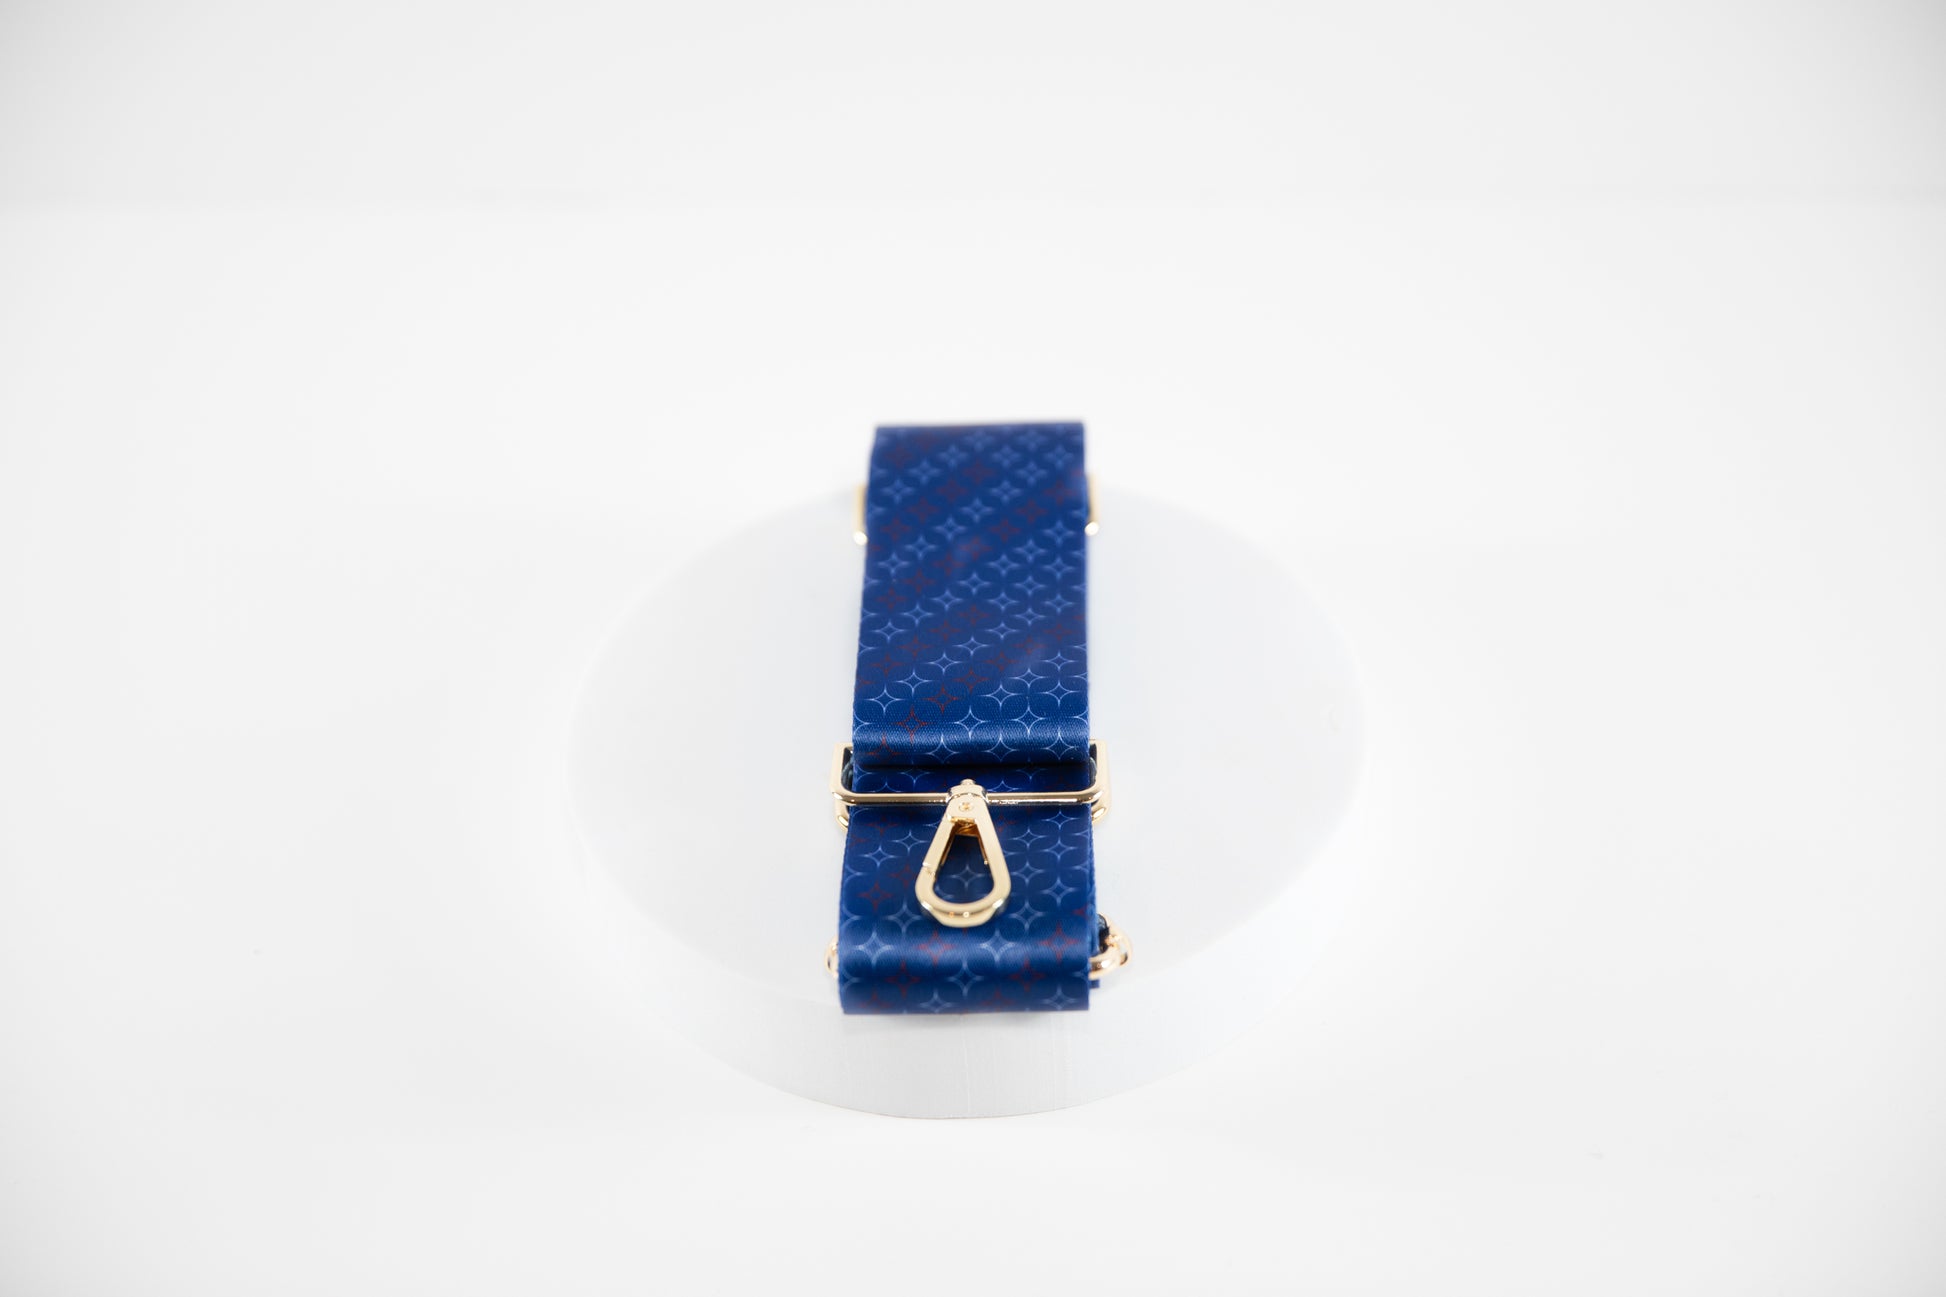 Elegant crossbody strap shown in red, white, and blue team colors of the Chicago Cubs.